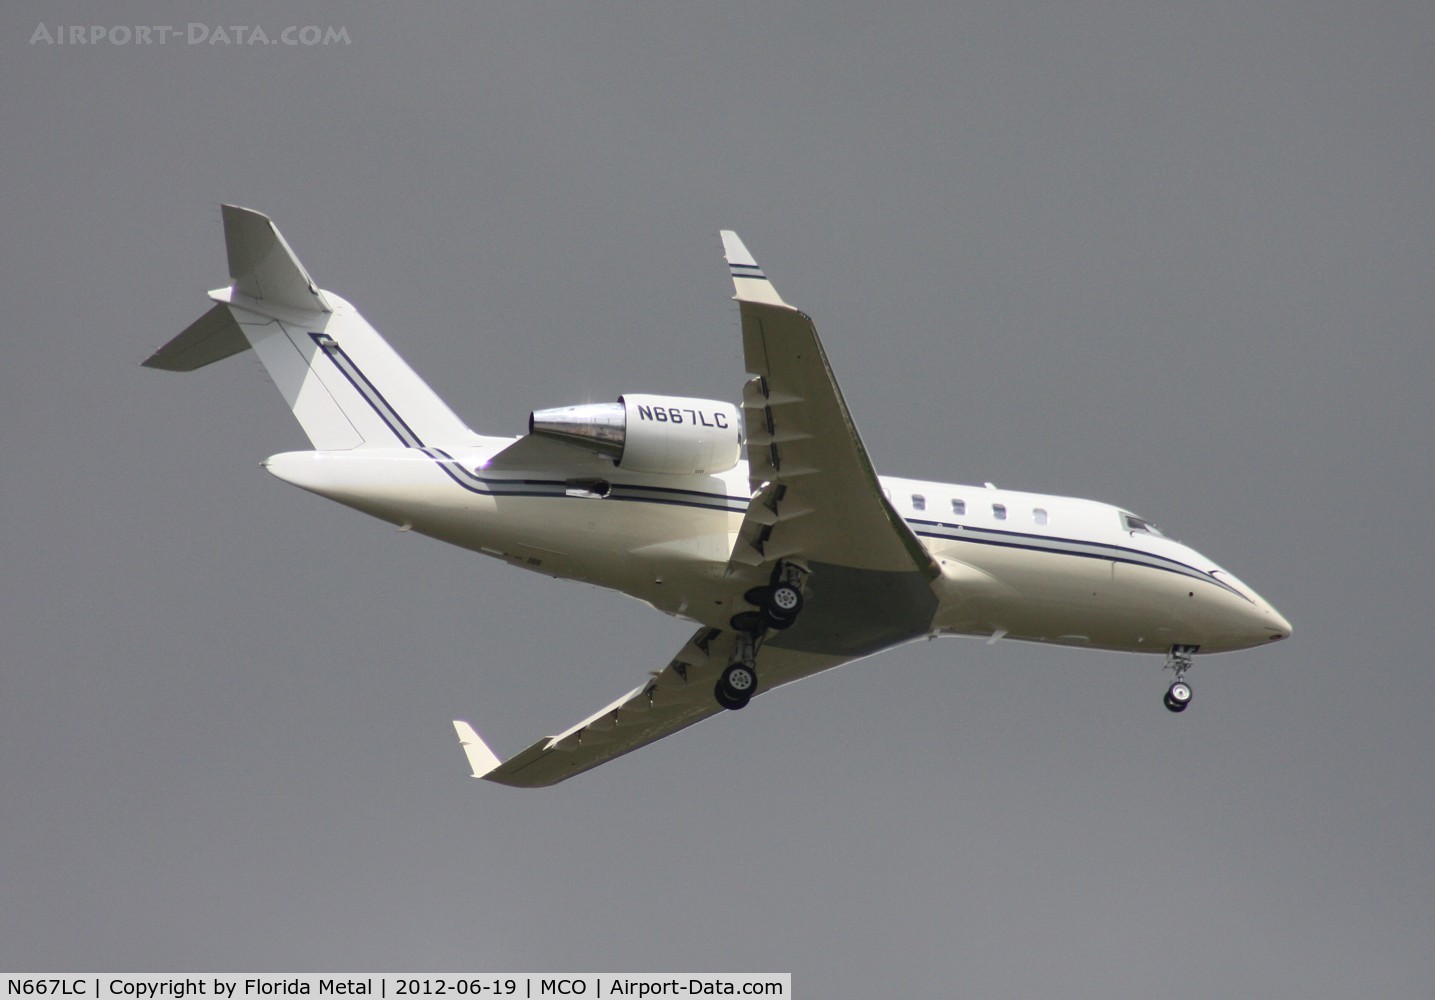 N667LC, 2007 Bombardier Challenger 604 (CL-600-2B16) C/N 5740, Challenger 605